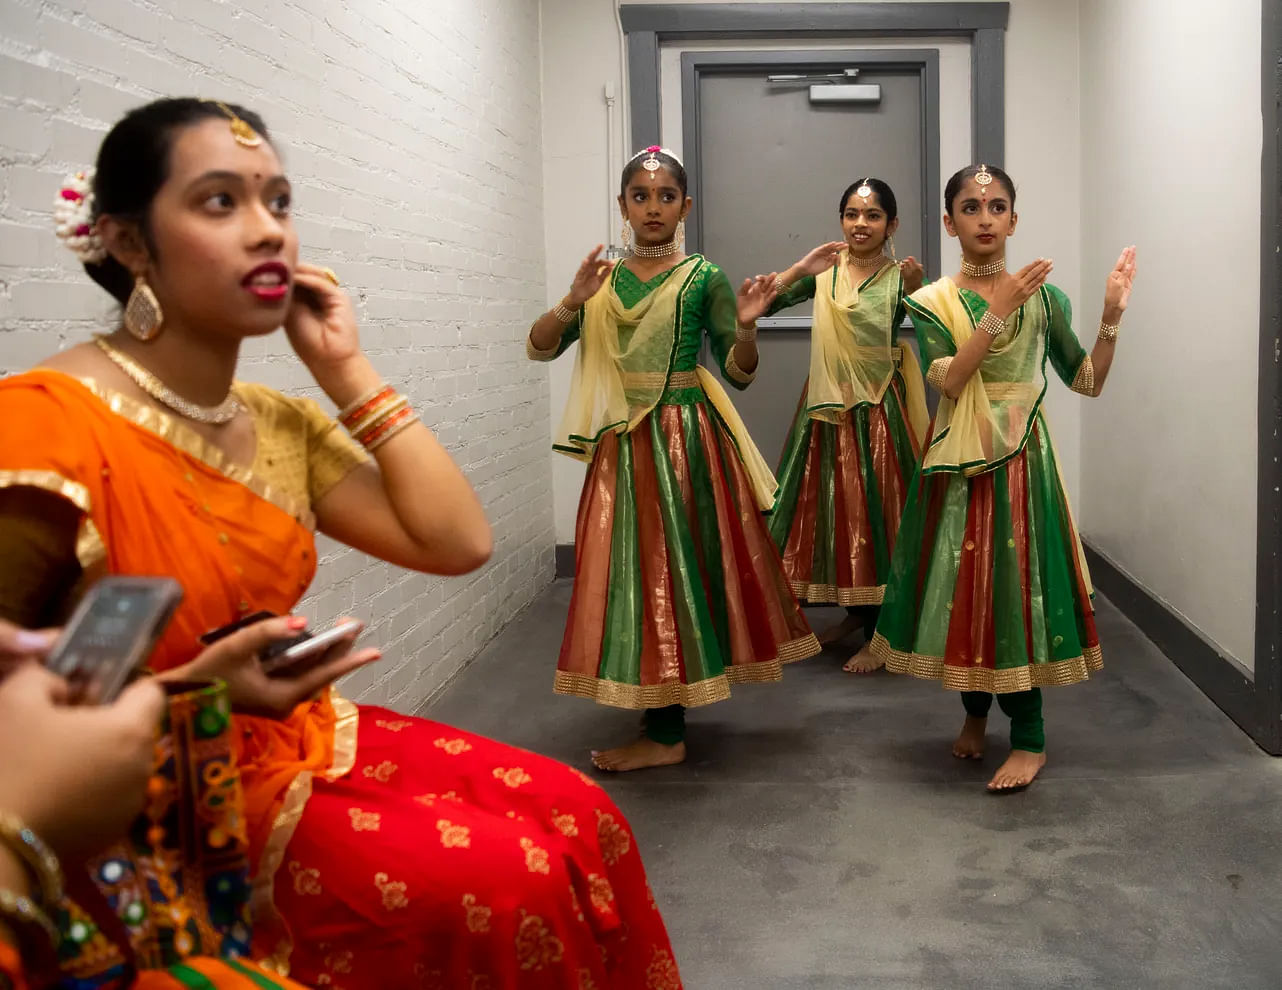 <div class="paragraphs"><p>Participants get ready for  their performance during a celebration of India  known as ” Azadi Ka Amrit Mahotsav” at Nolensville Historical Society in Nolensville, Tennessee, USA.&nbsp;</p></div>